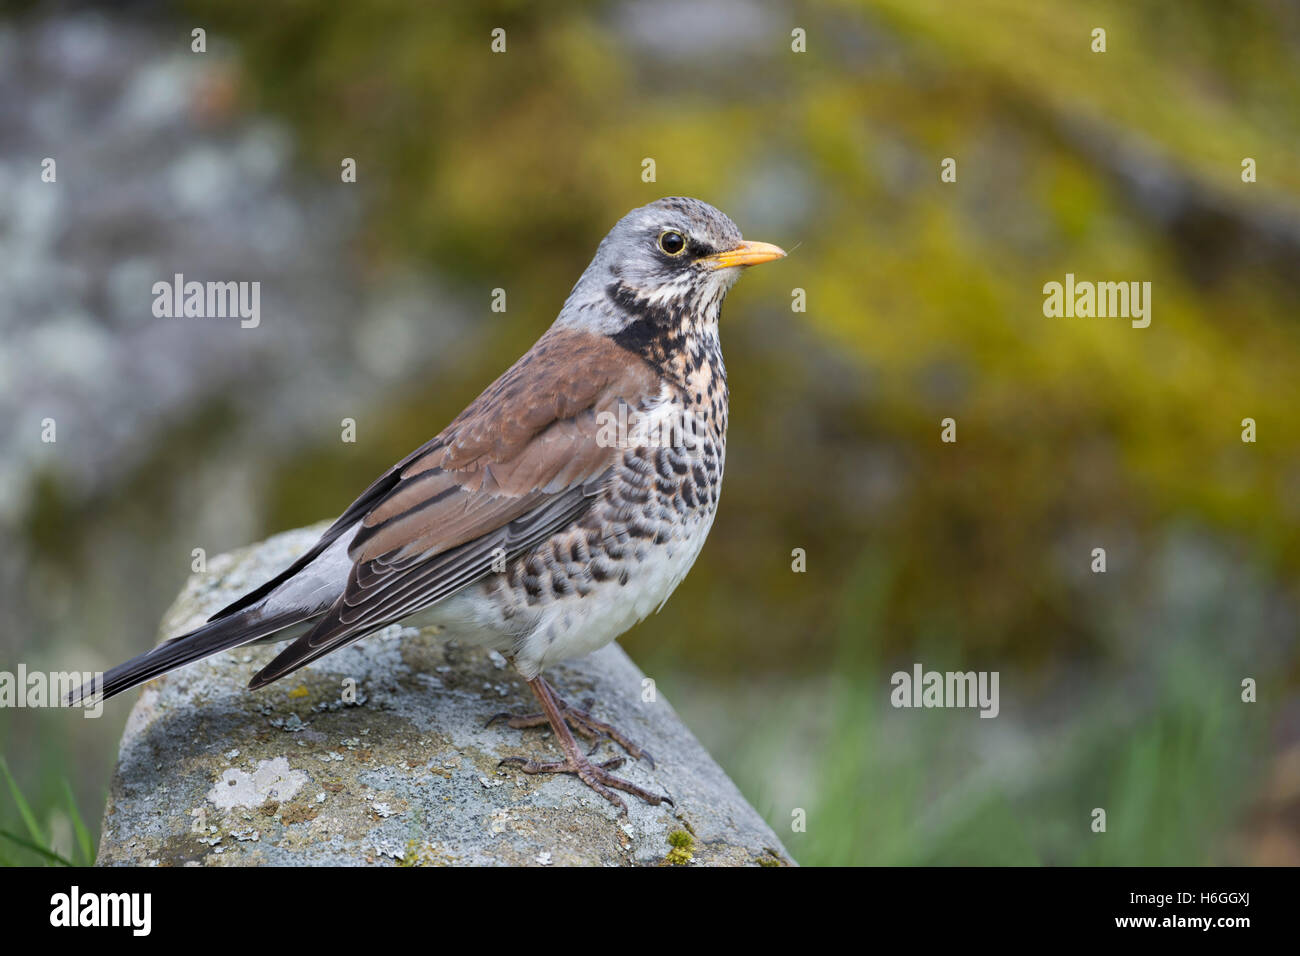 Fieldfare / Wacholderdrossel ( Turdus pilaris ),in colorful breeding dress, perched on a rock, close-up, nice colors, side view. Stock Photo